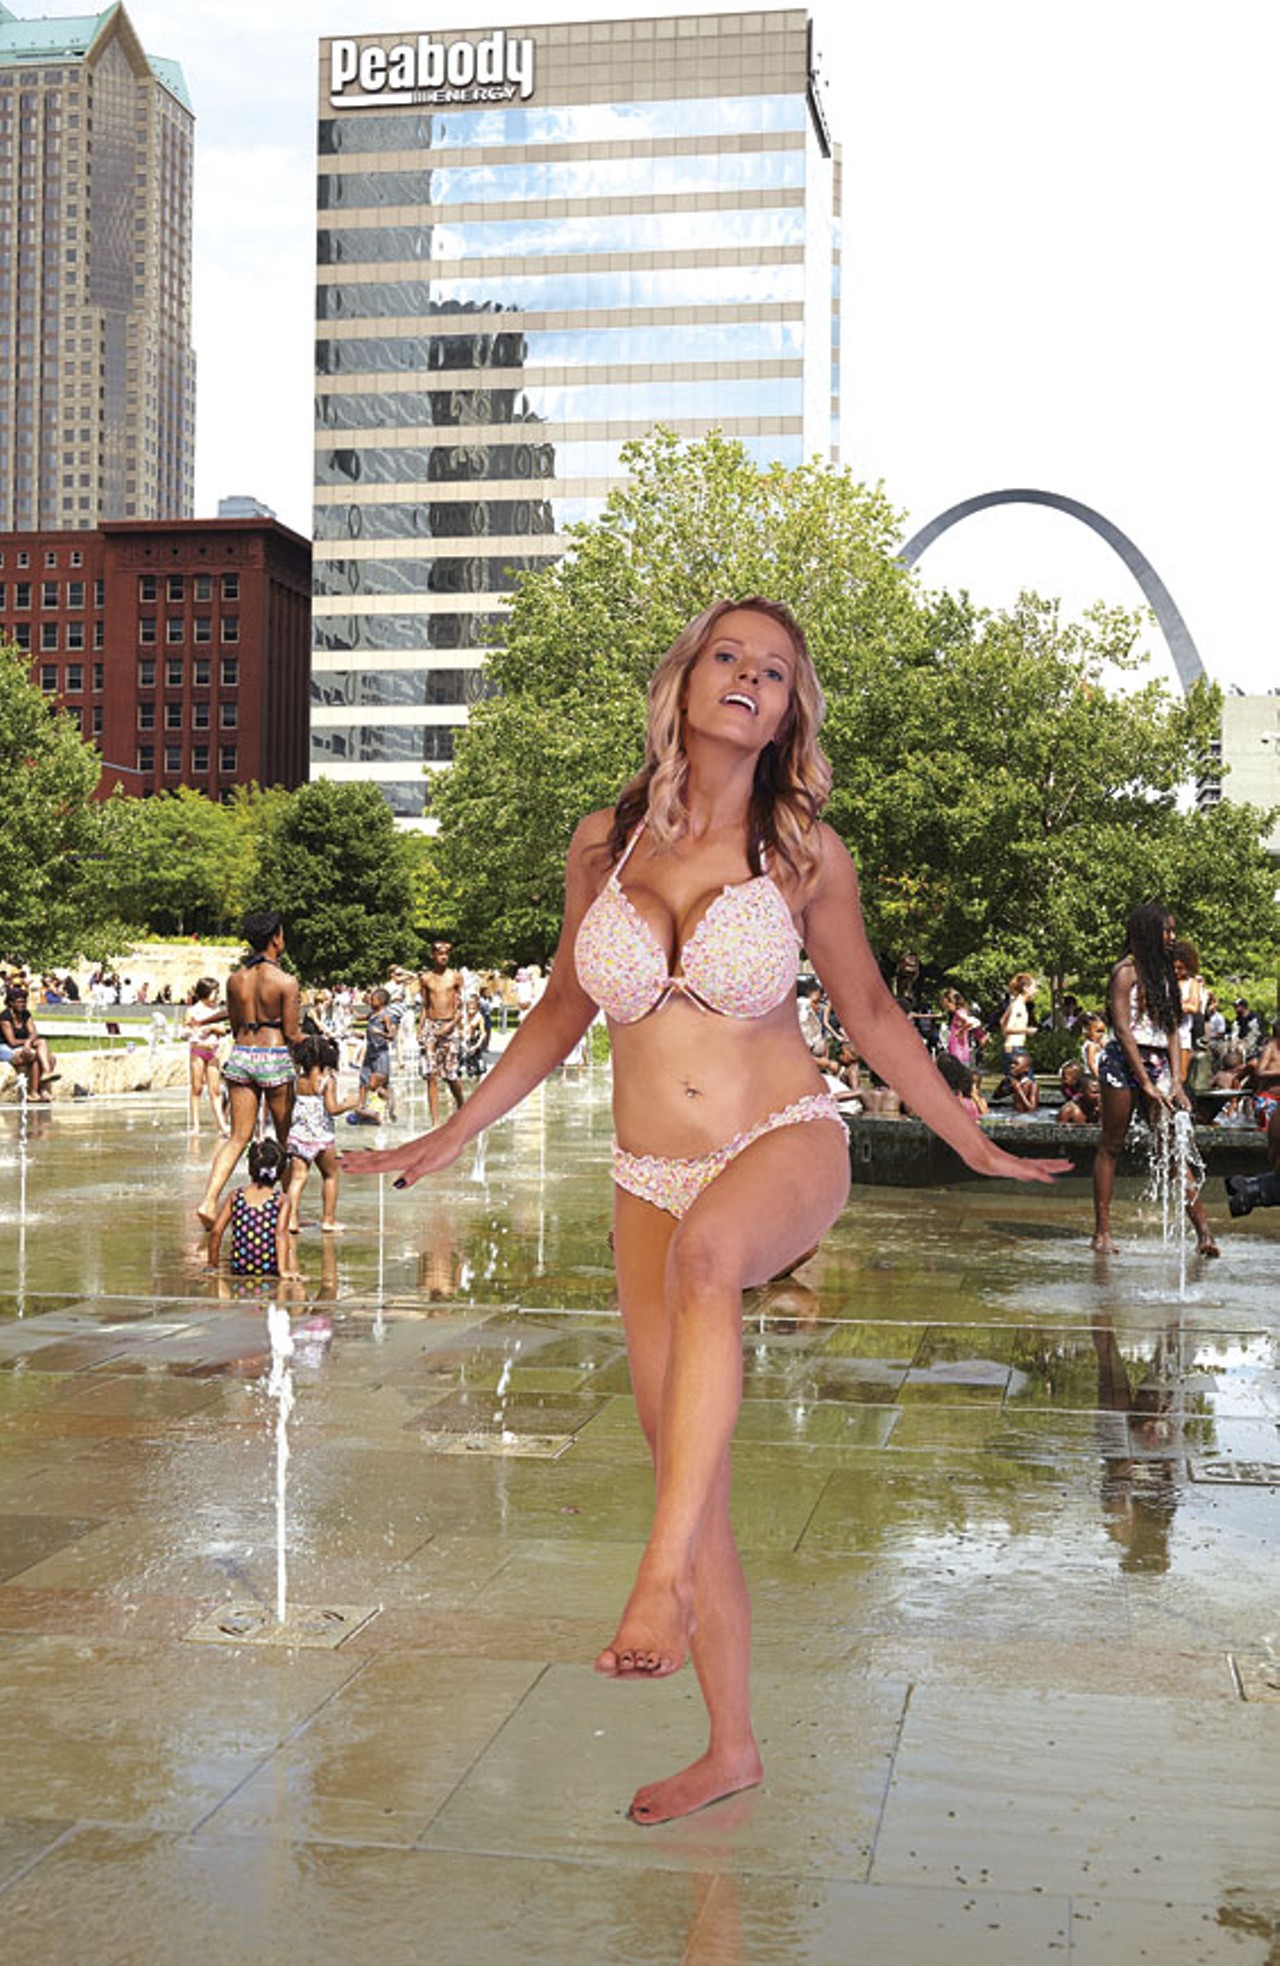 Adults aren't supposed to "lounge" in Citygarden's splash pool, so Rachel must frolic instead in the park's spray plaza. It is open to all &mdash; even dogs.